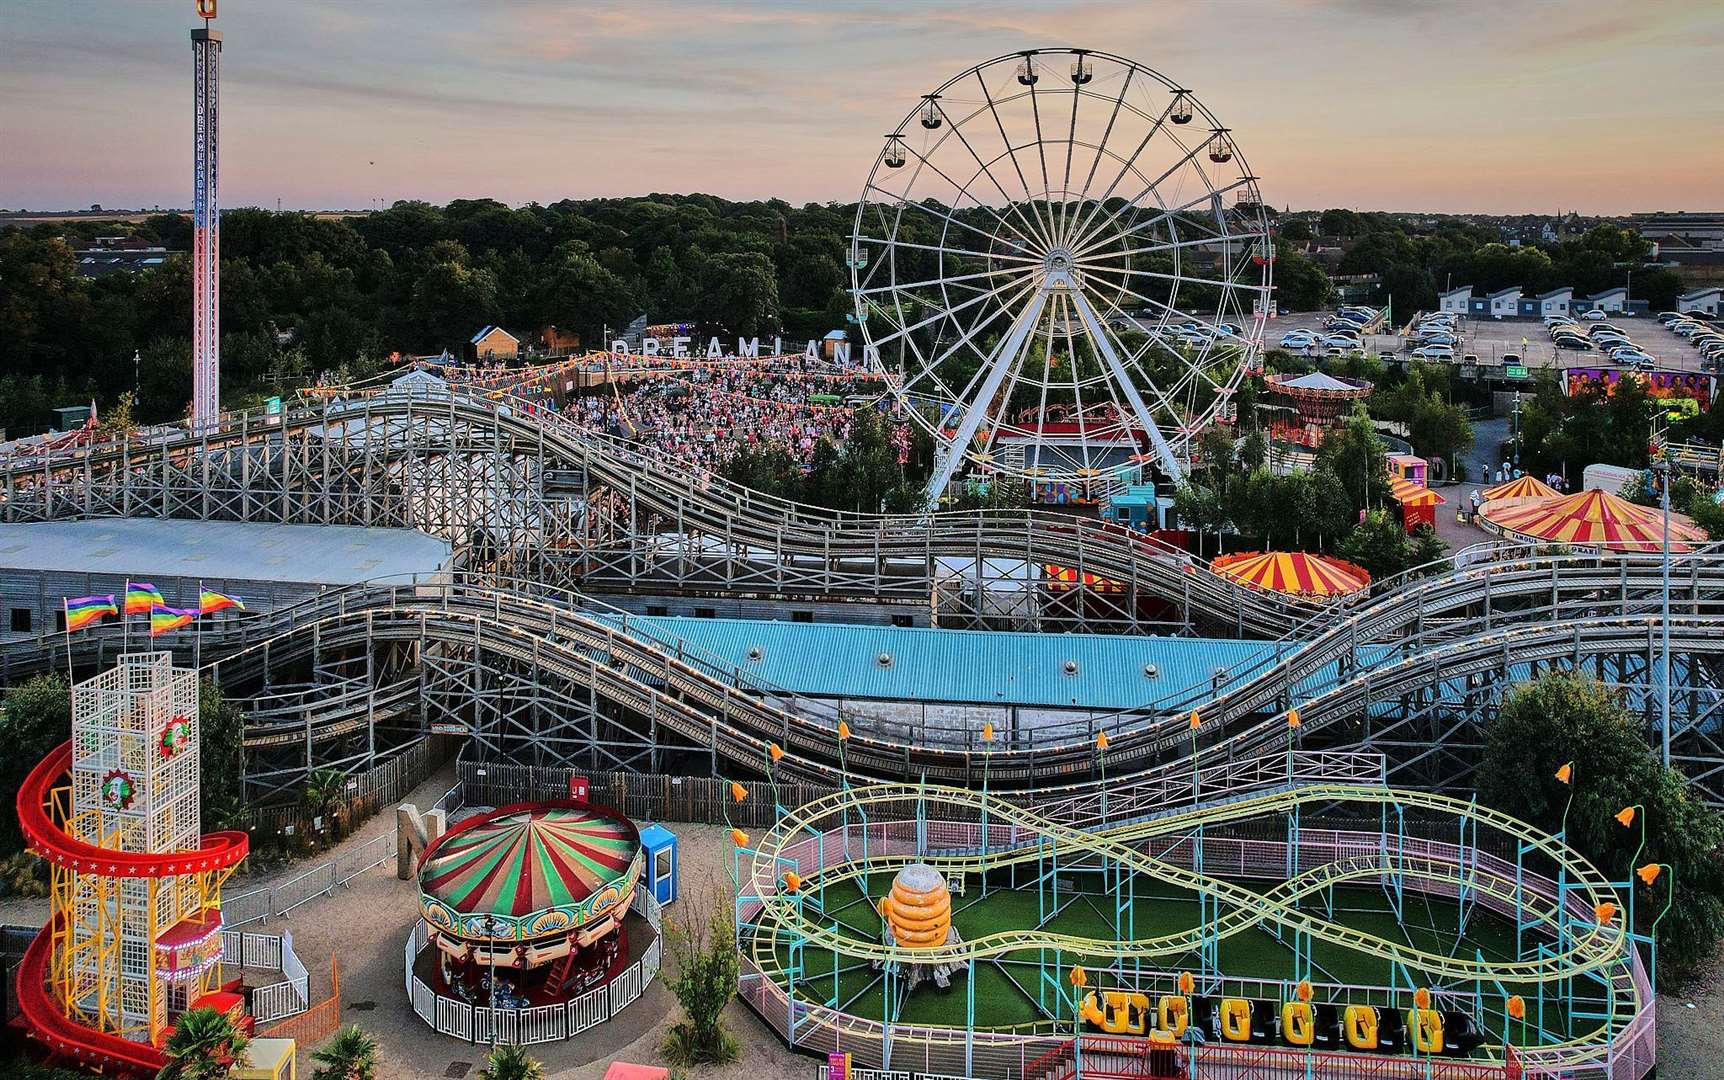 Will you have a go on the ferris wheel, the waltzers or the Scenic Railway? Picture: Dreamland